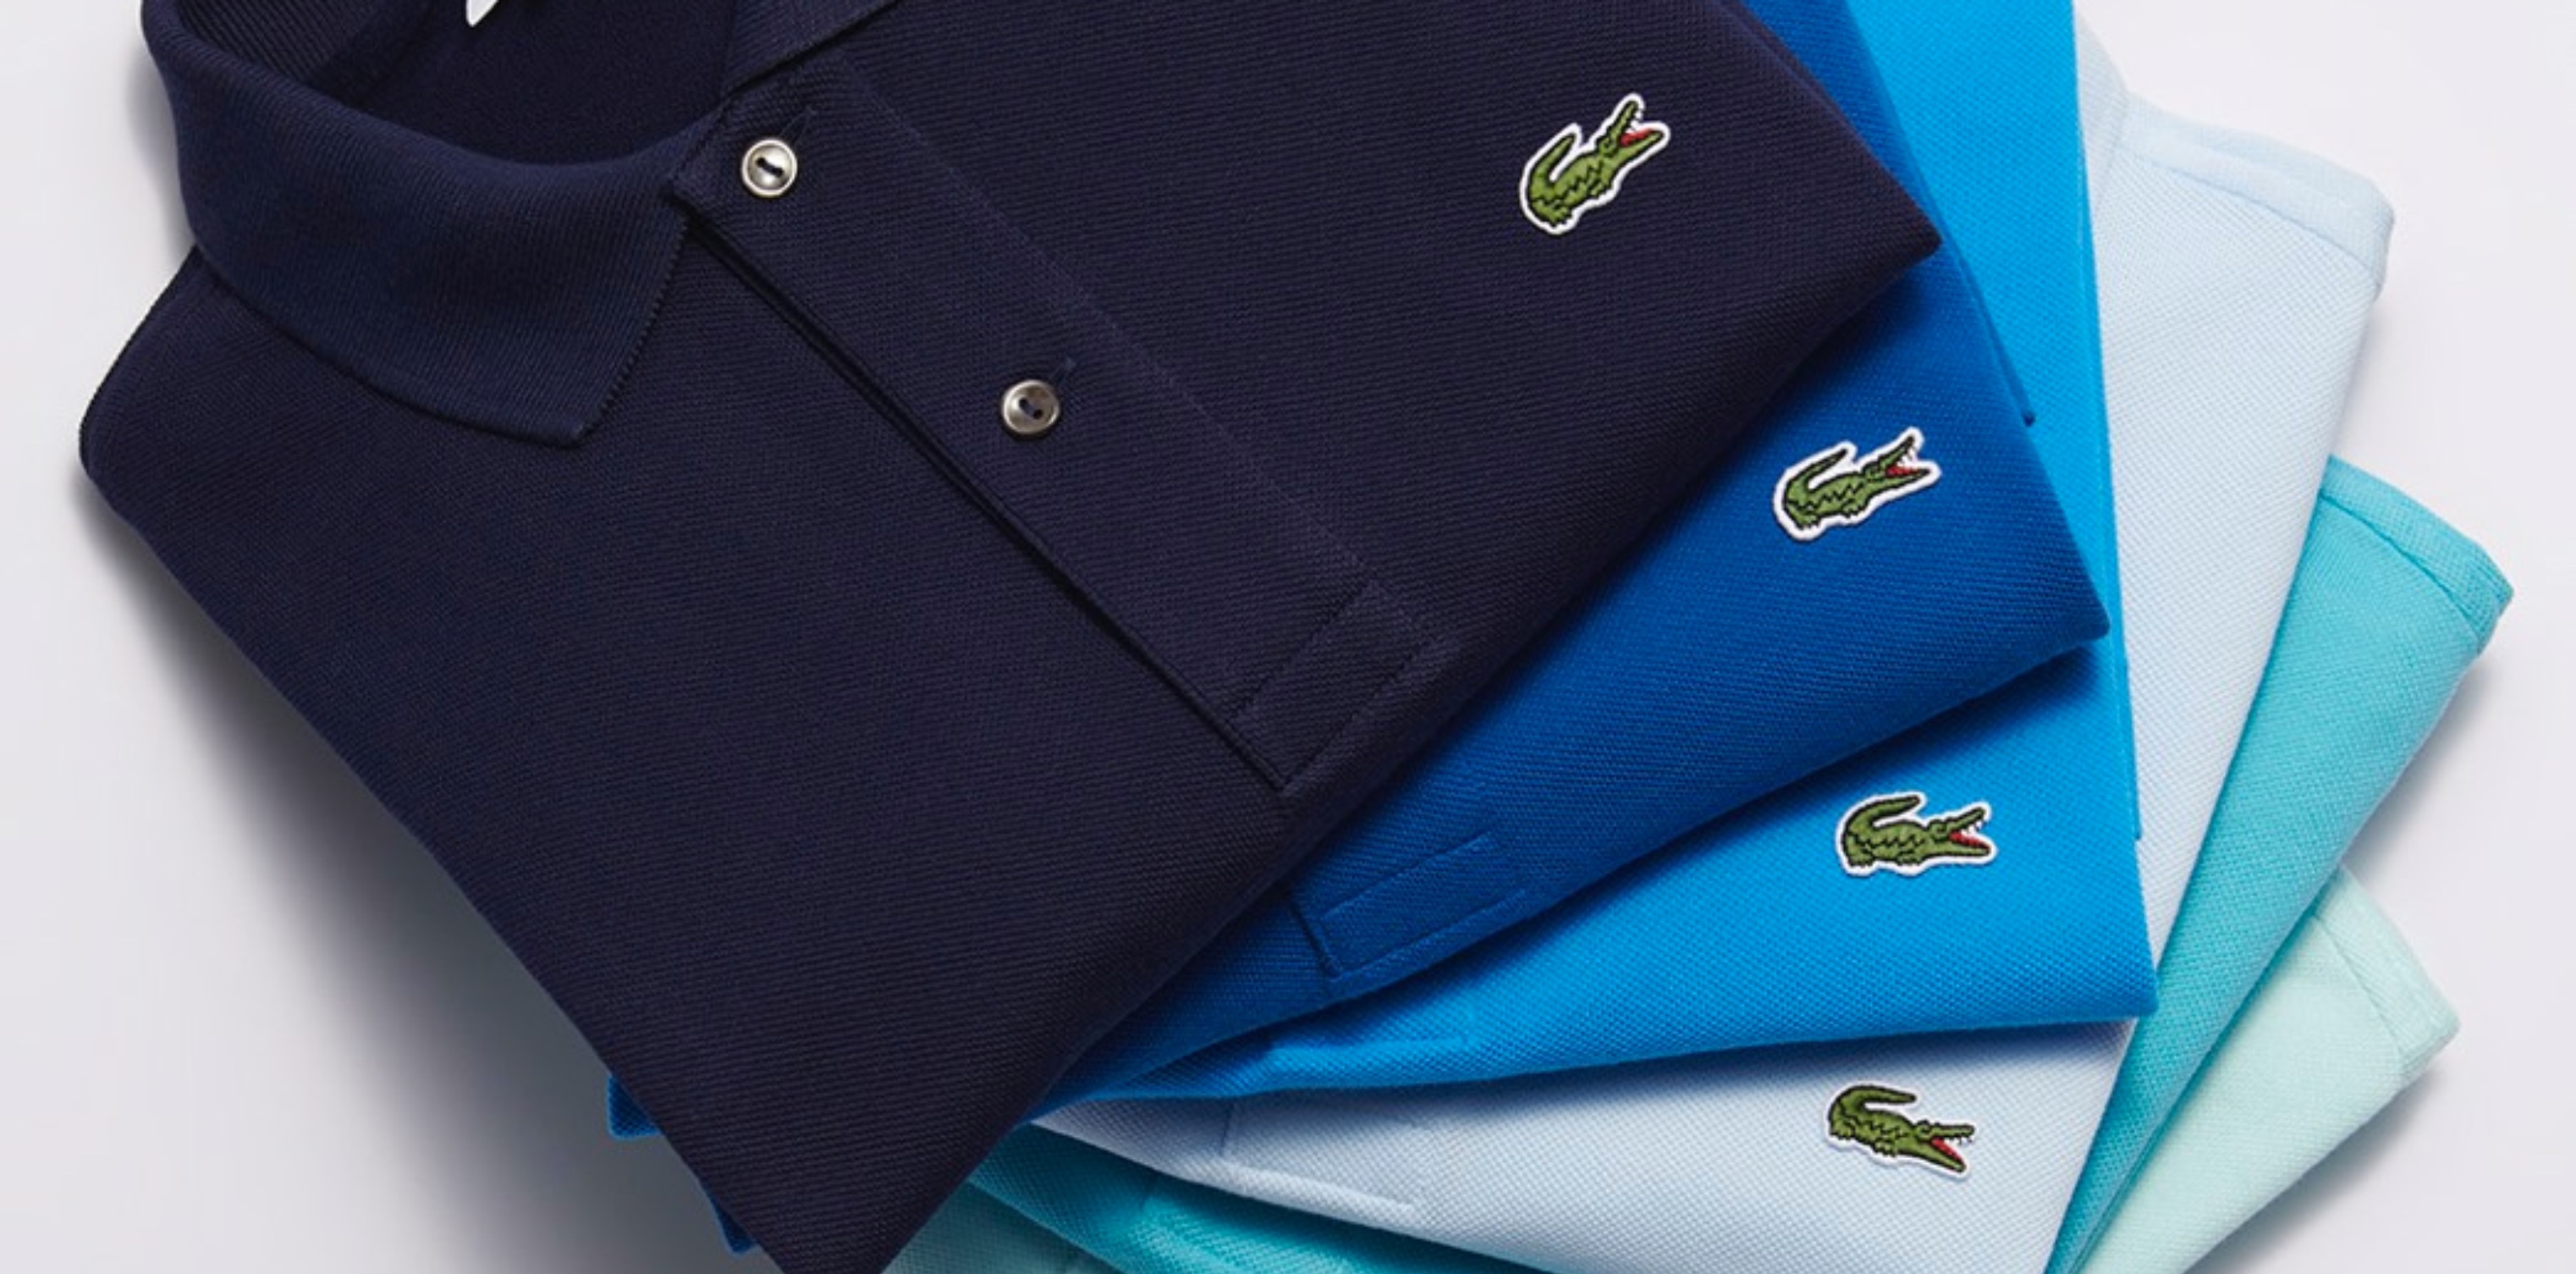 Lacoste Semi-Annual Sale takes up to 50% polos, sweatshirts, more from $7